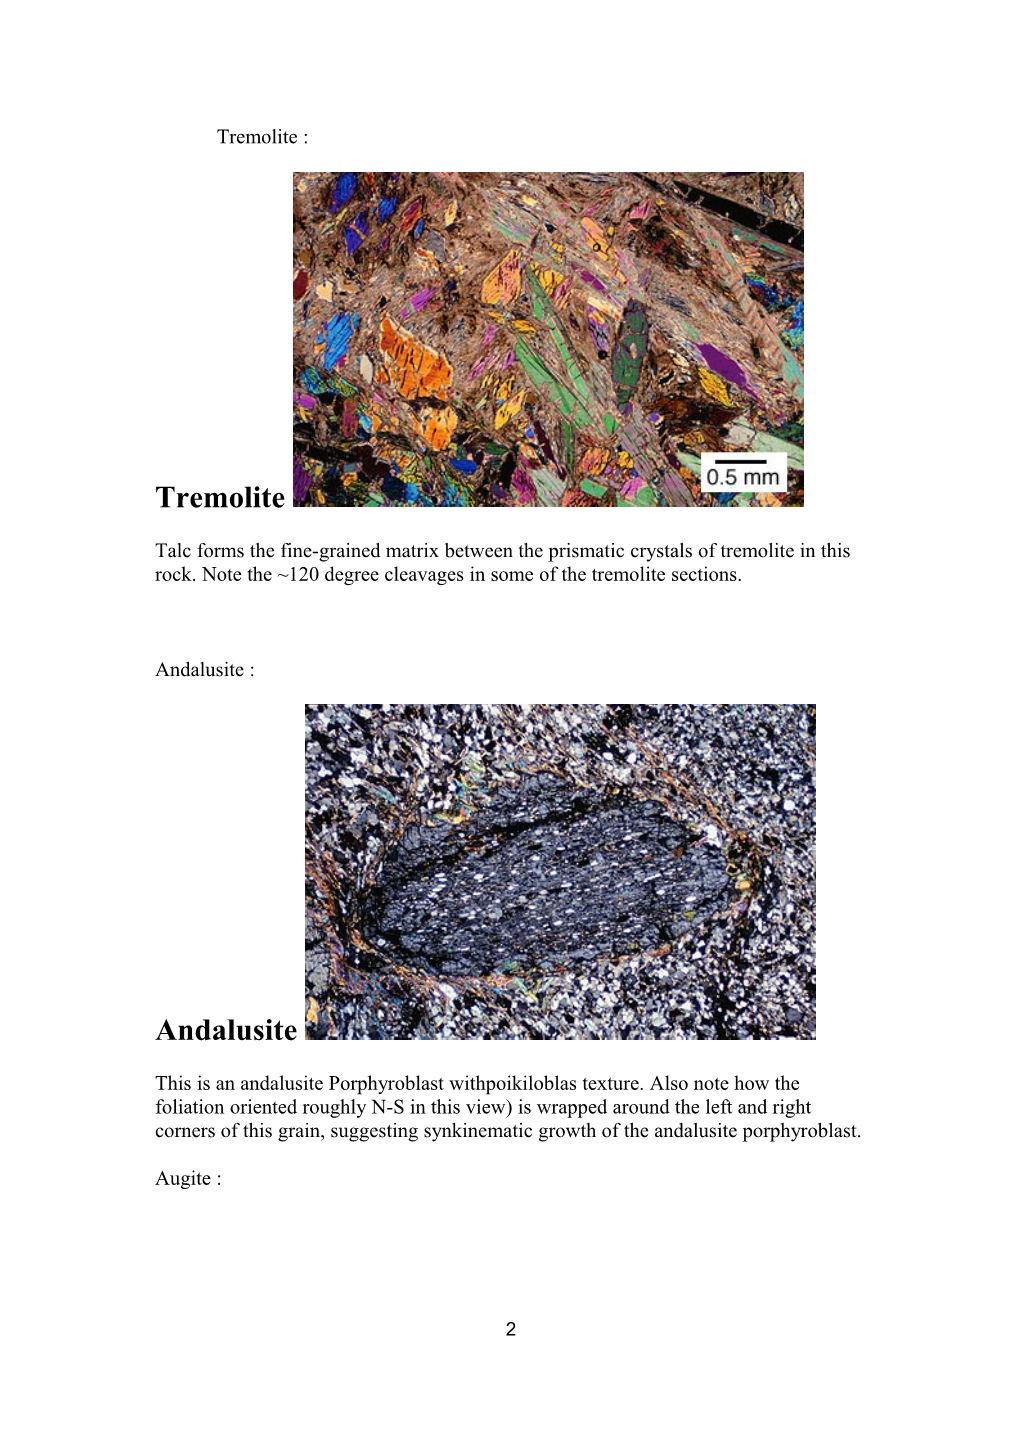 Index of Minerals in Thin-Section